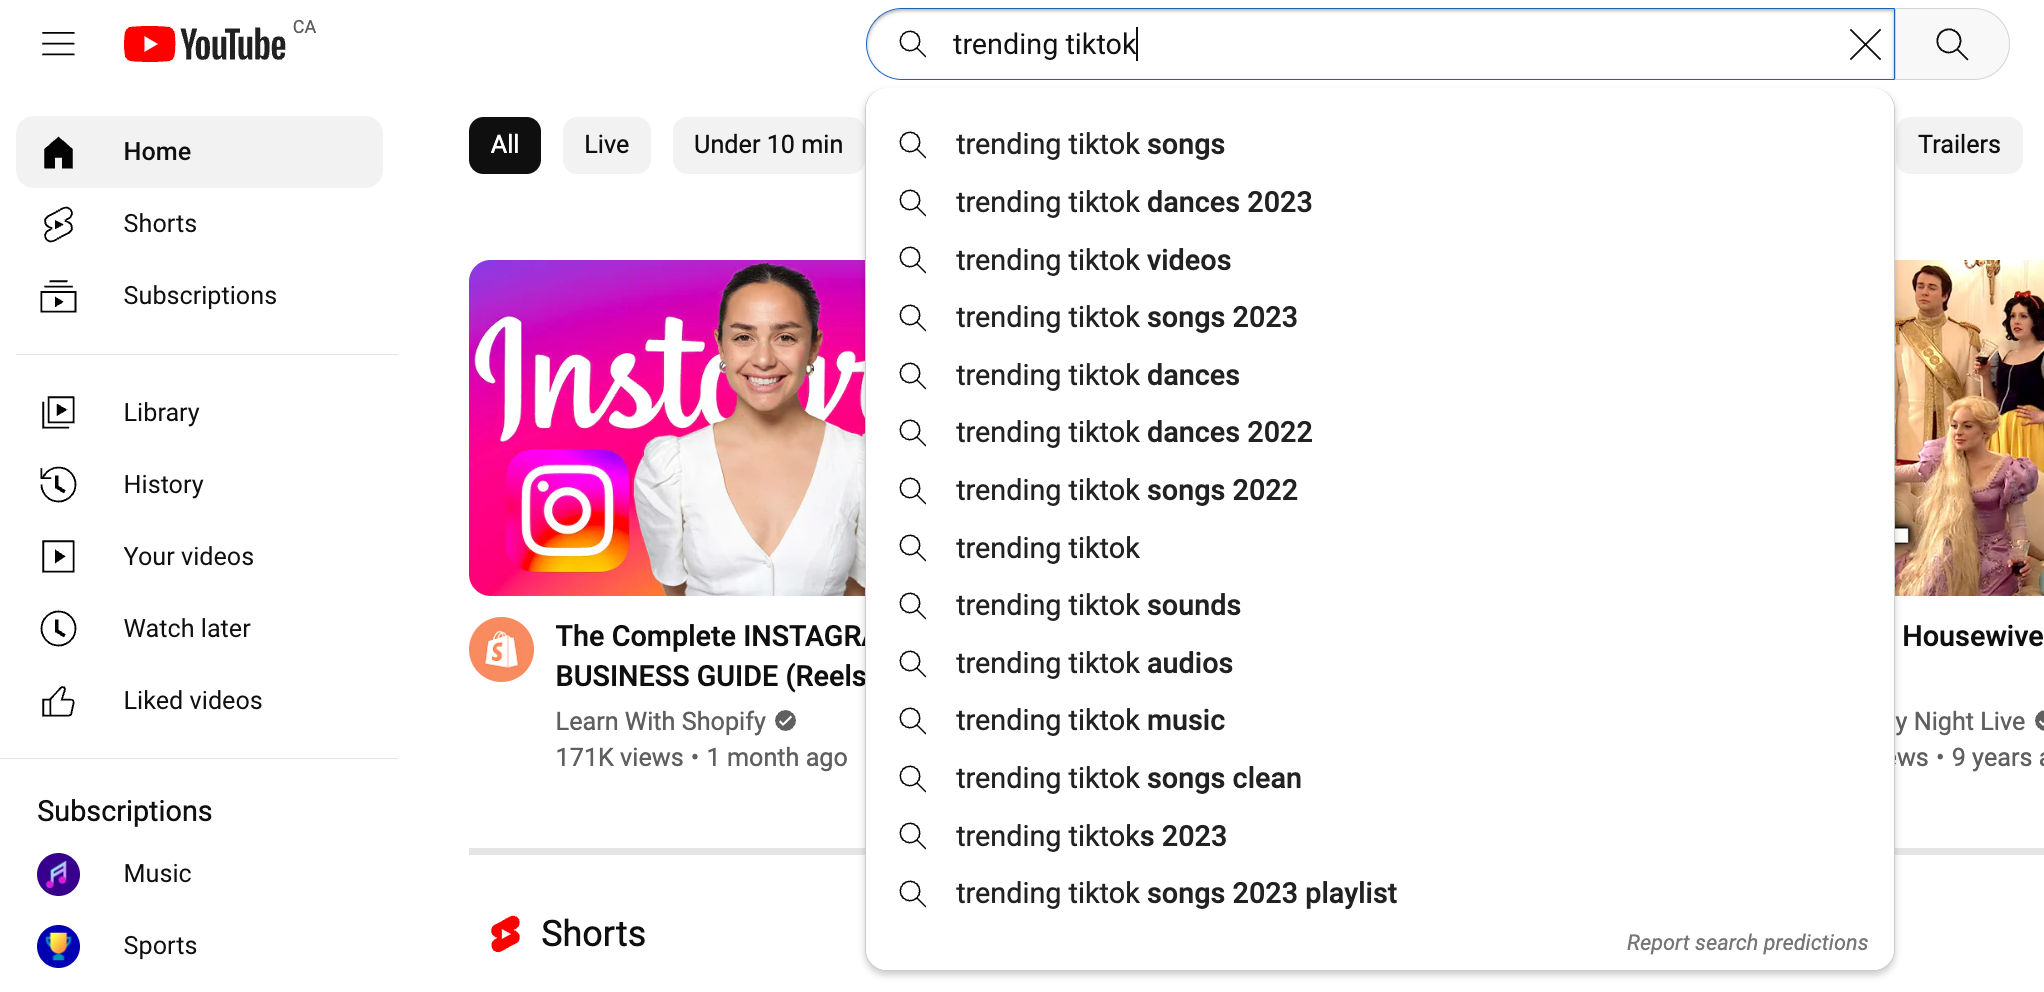 A screengrab of the YouTube UI showing trending TikTok sound search suggestions